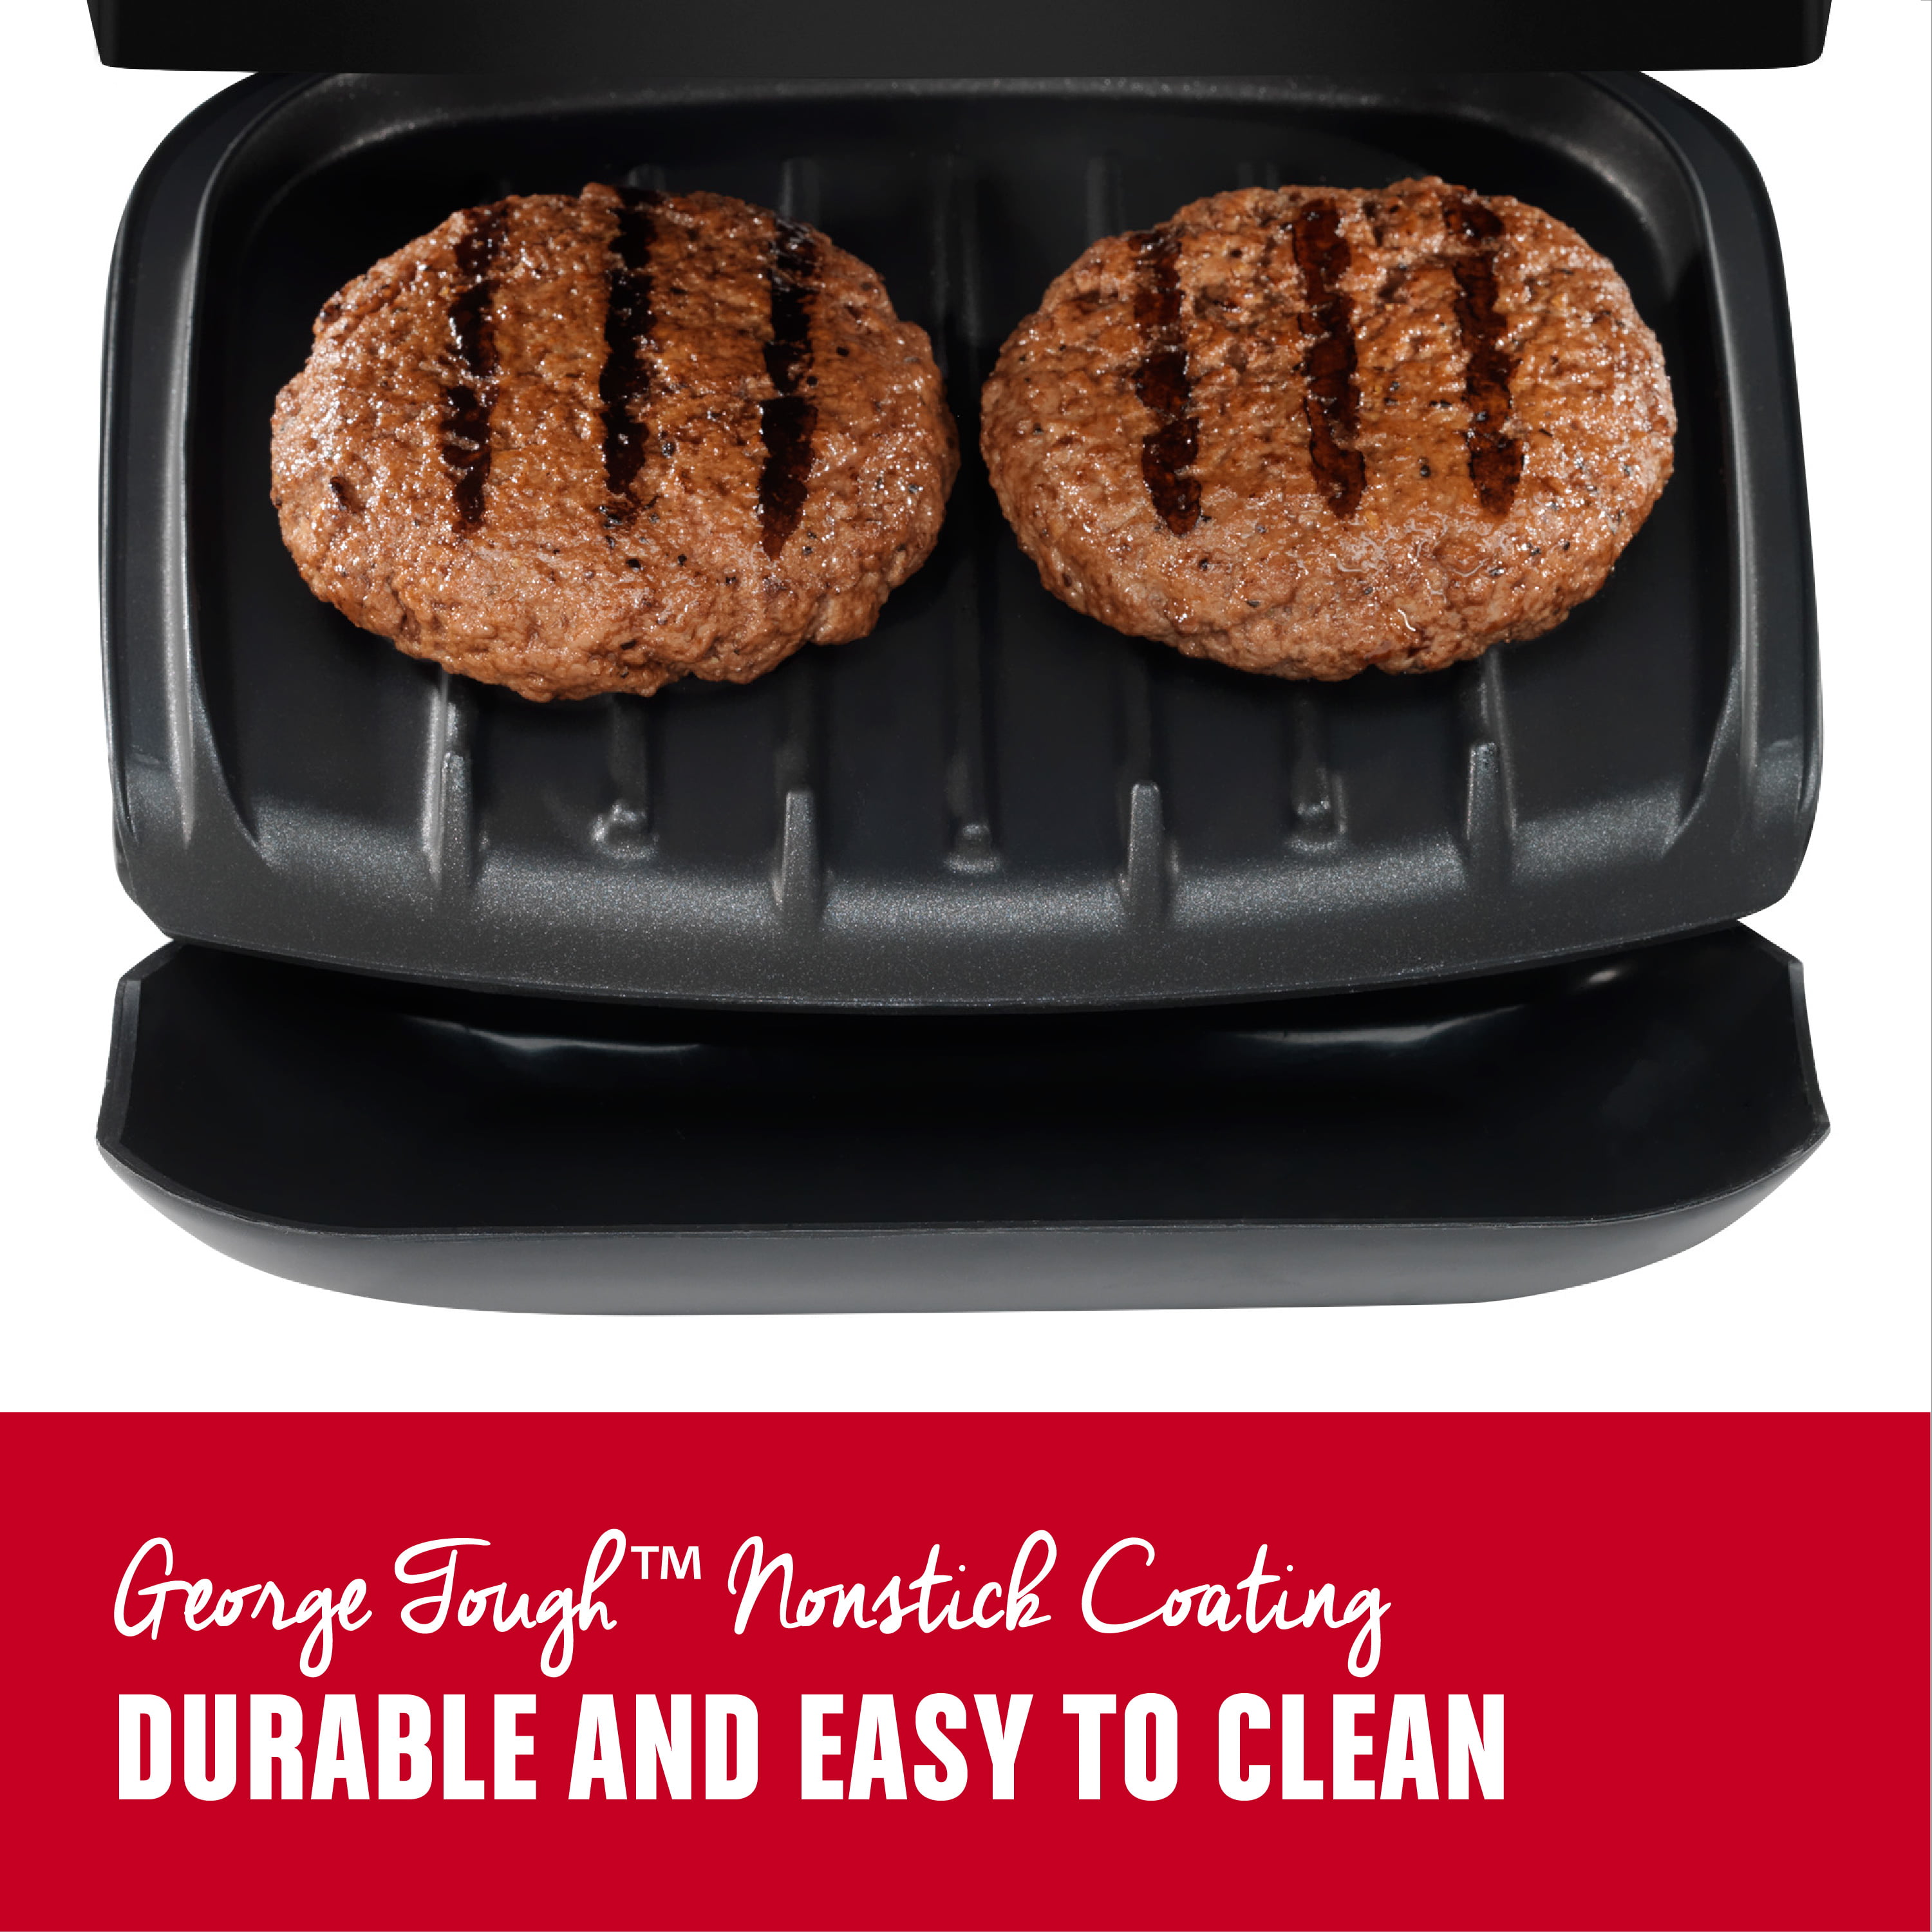 George Foreman 5-Serving Classic Plate Grill GRS075B - The Home Depot